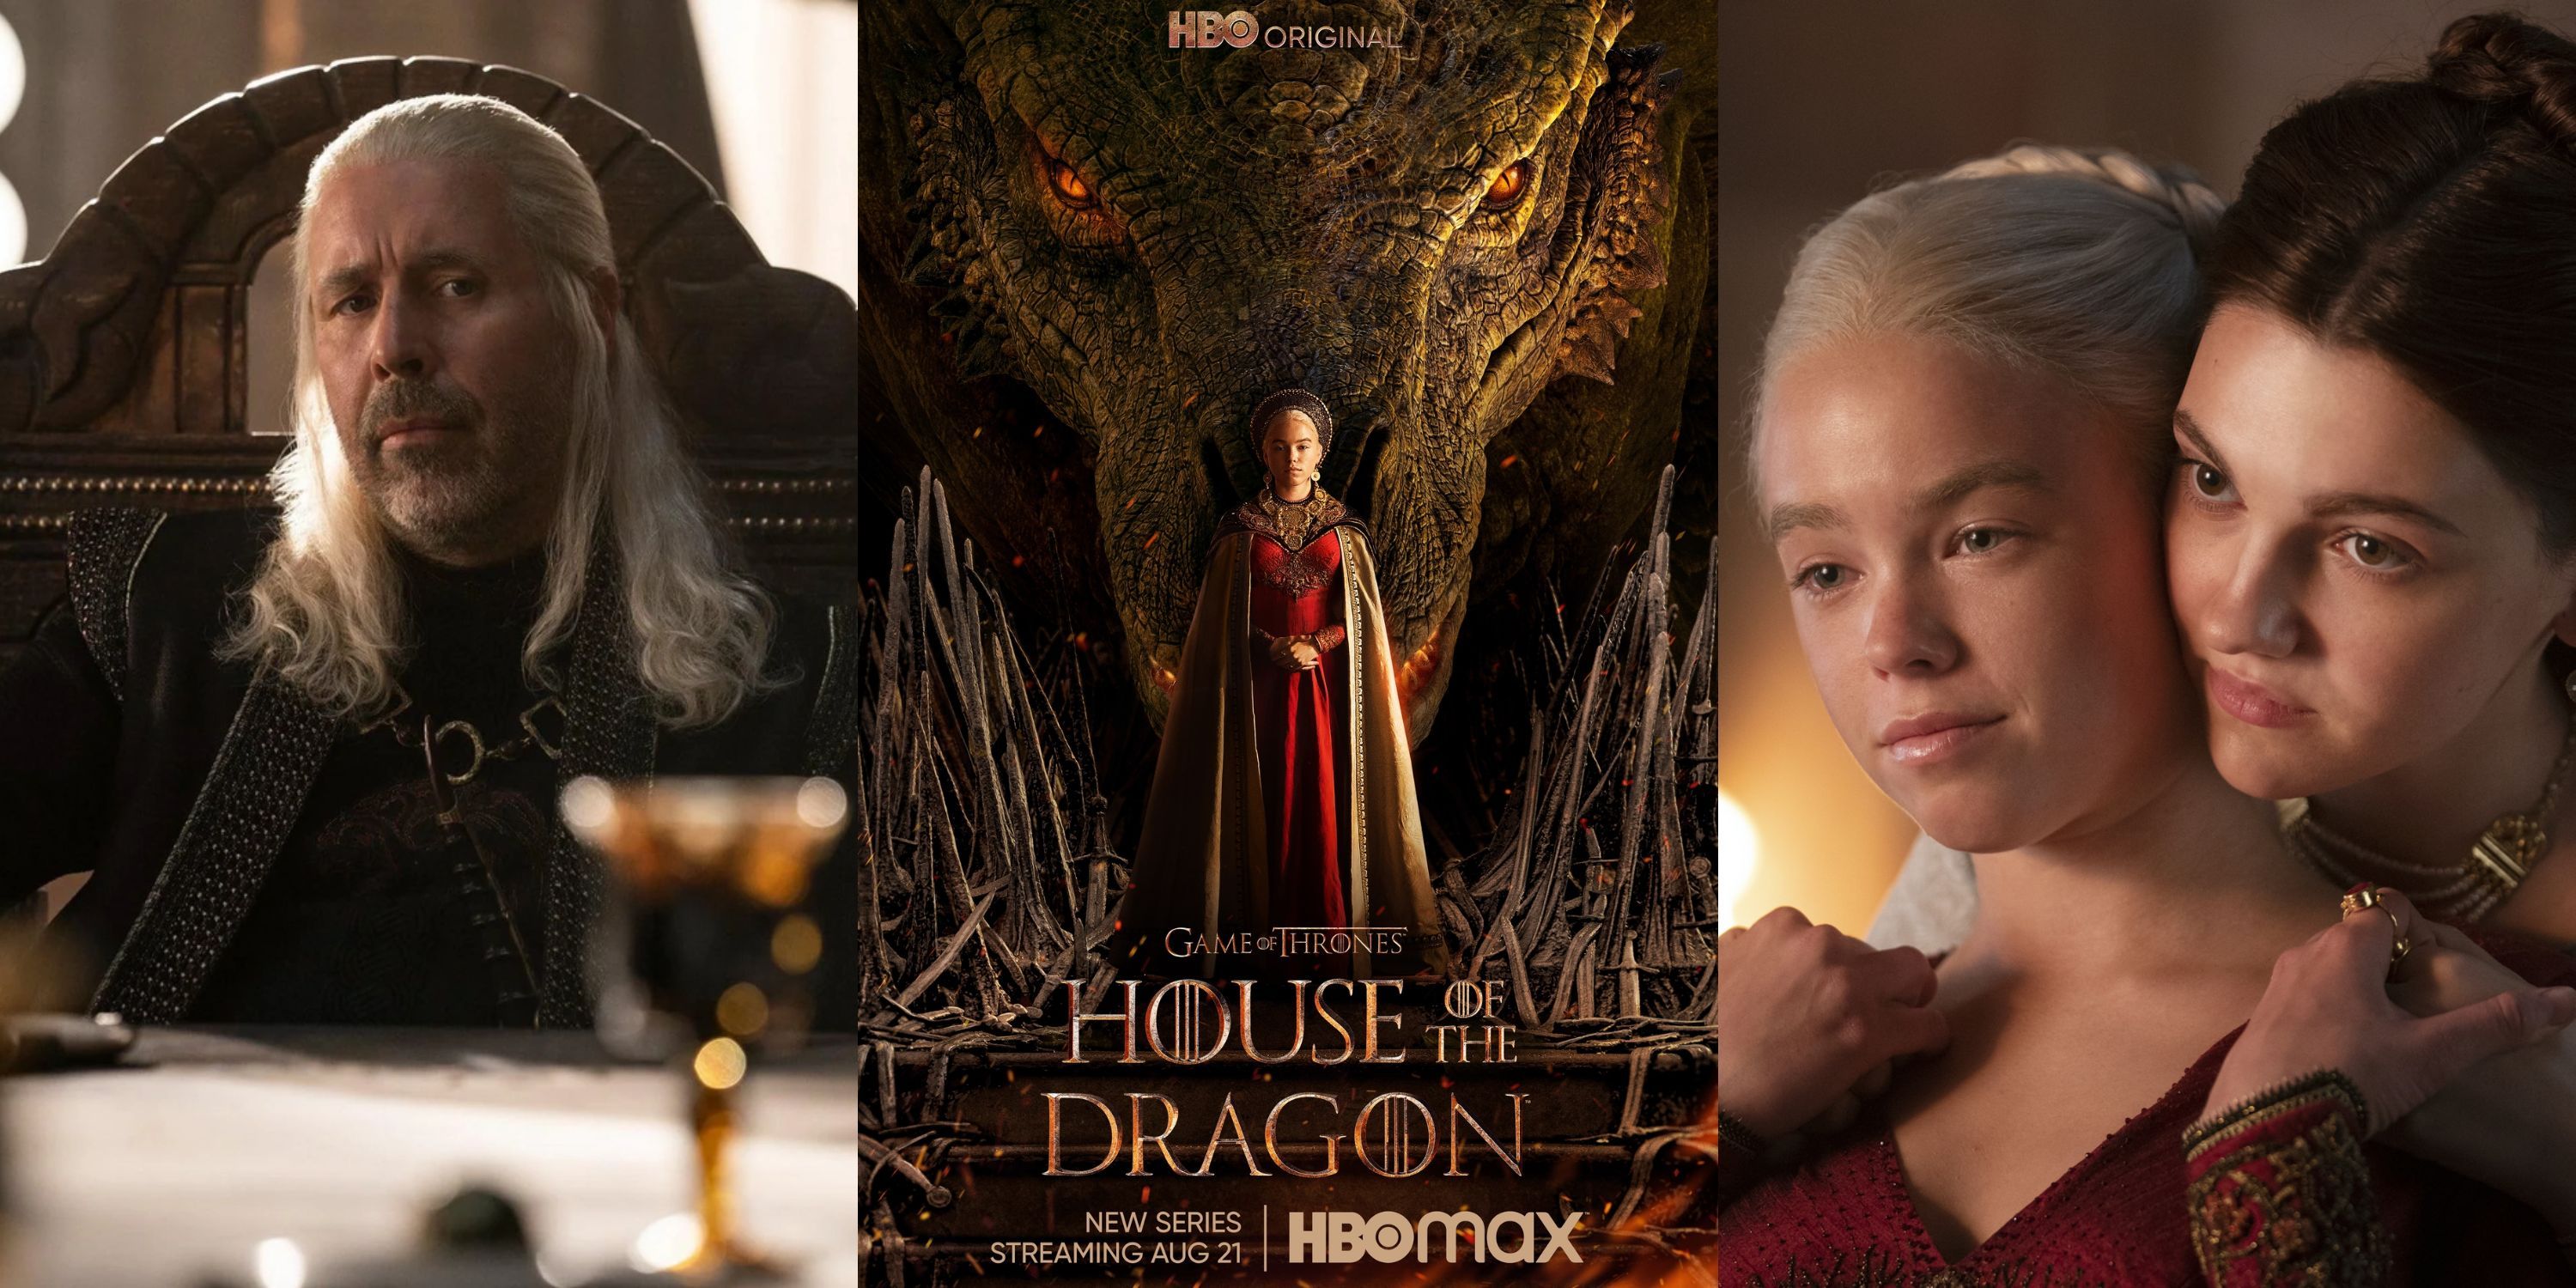 Biggest Takeaways From House of the Dragon Trailer